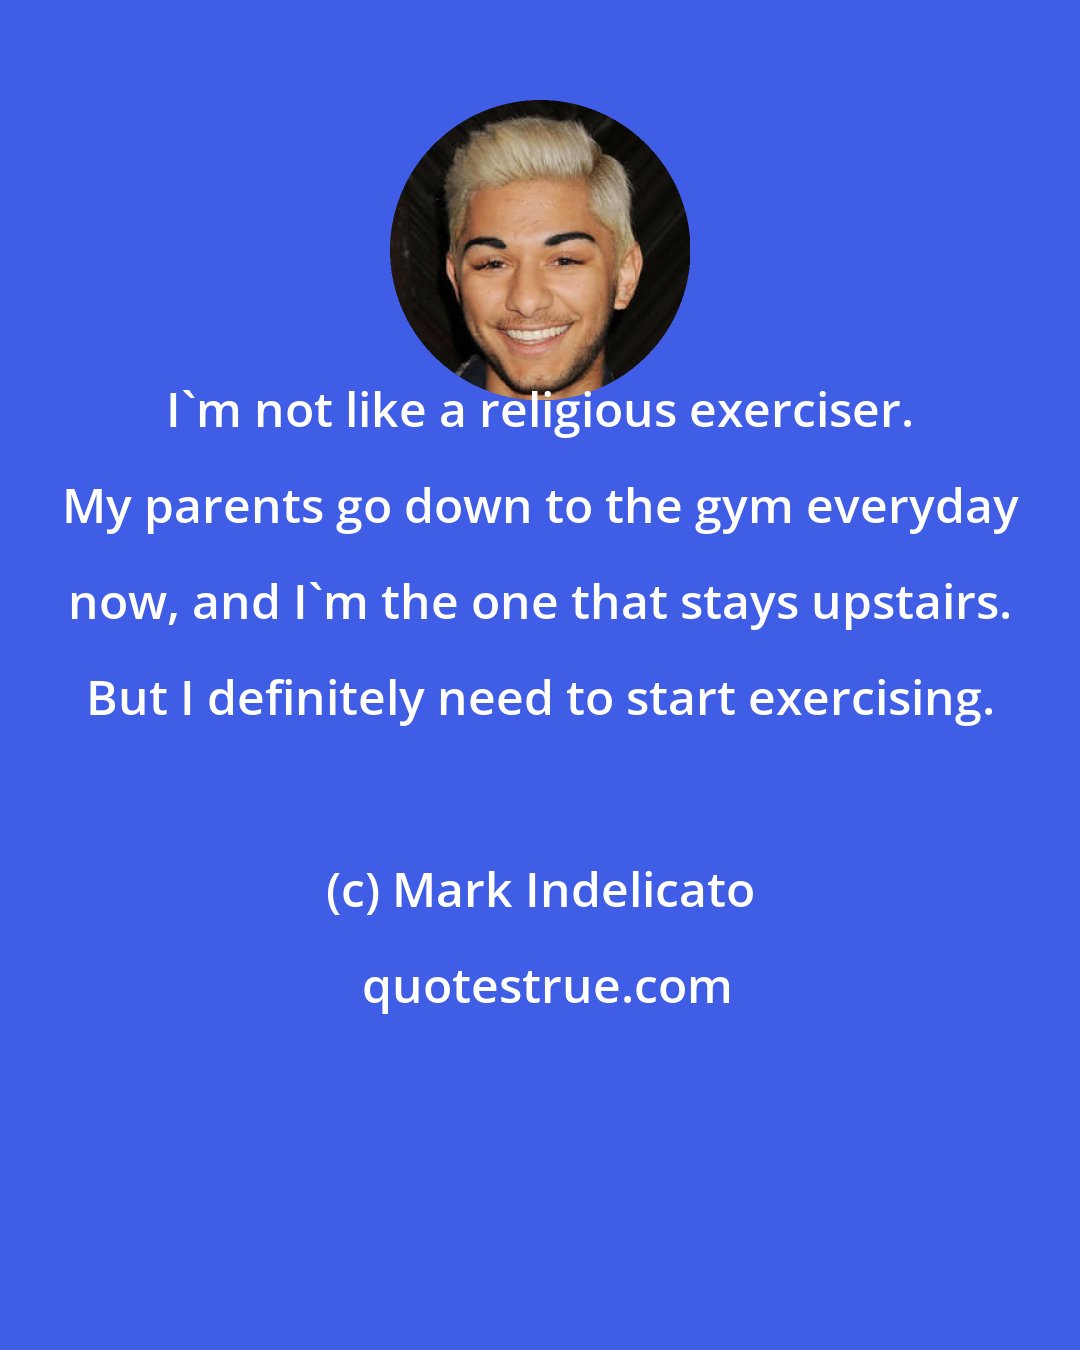 Mark Indelicato: I'm not like a religious exerciser. My parents go down to the gym everyday now, and I'm the one that stays upstairs. But I definitely need to start exercising.